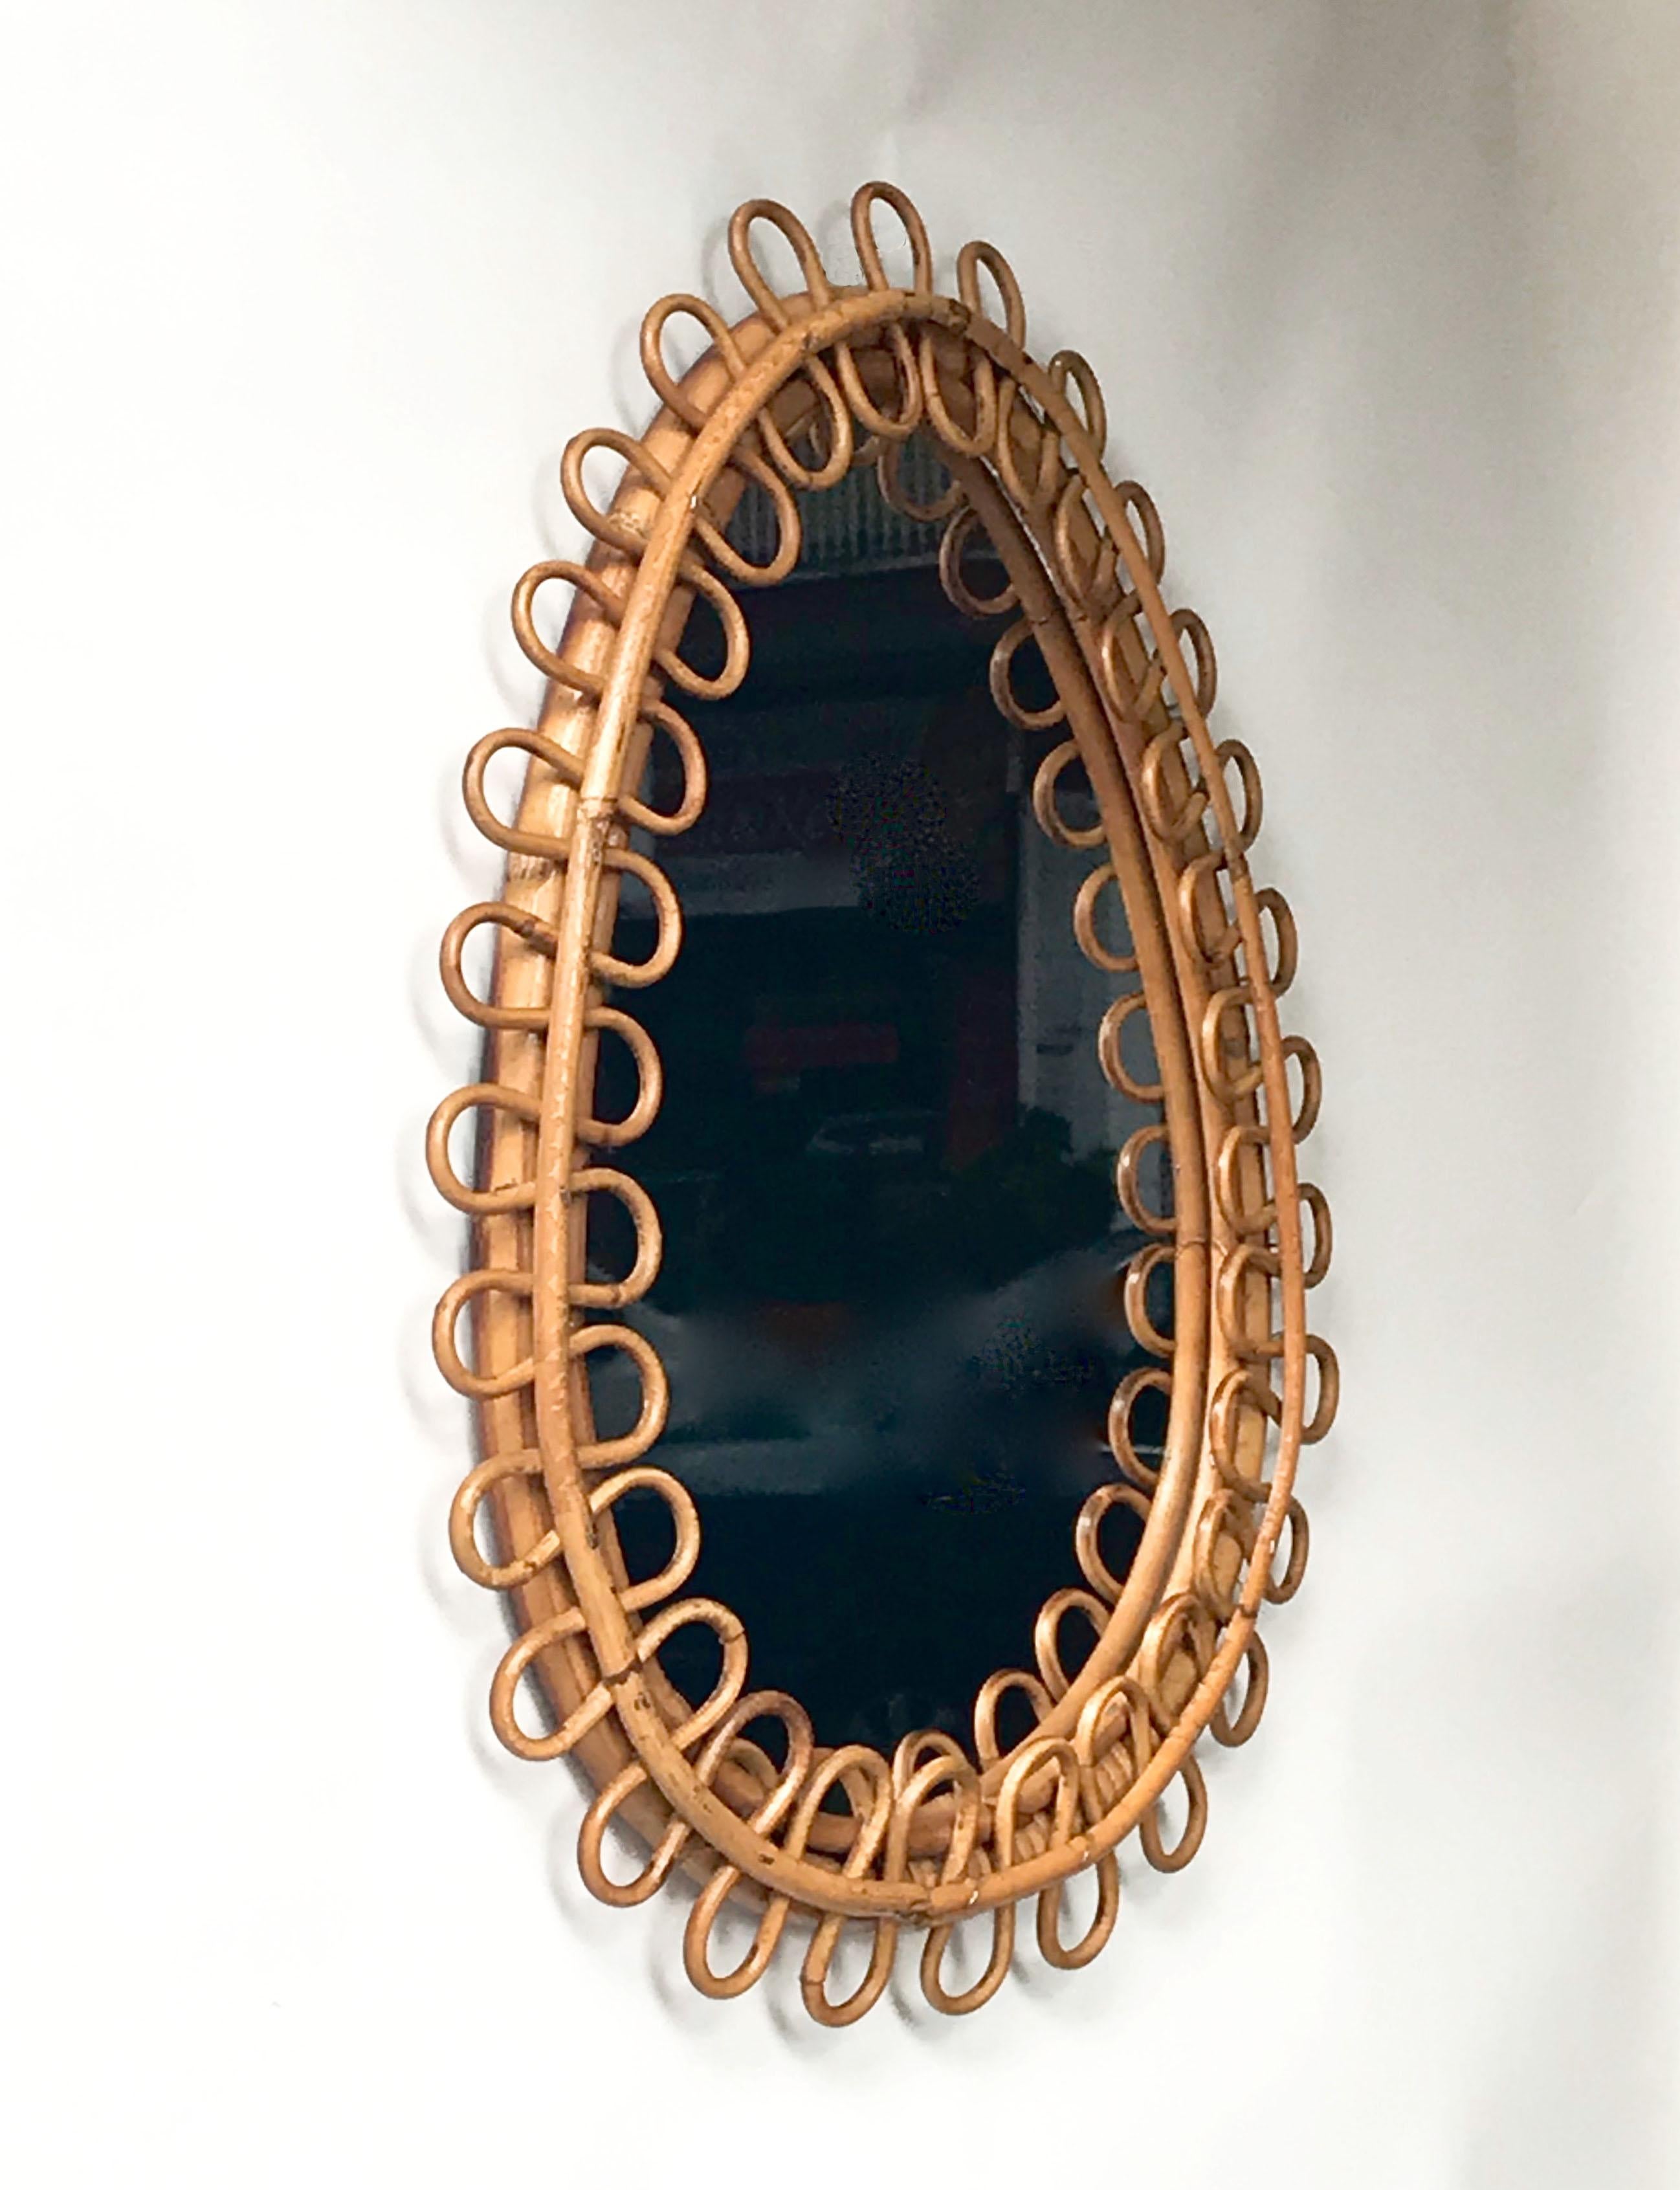 Wonderful midcentury French Riviera oval bamboo and rattan wall mirror. This amazing item was produced in Italy during the 1960s.

This wall mirror is fantastic because of its dimensional egg shape and for the complex yet wonderful bamboo and